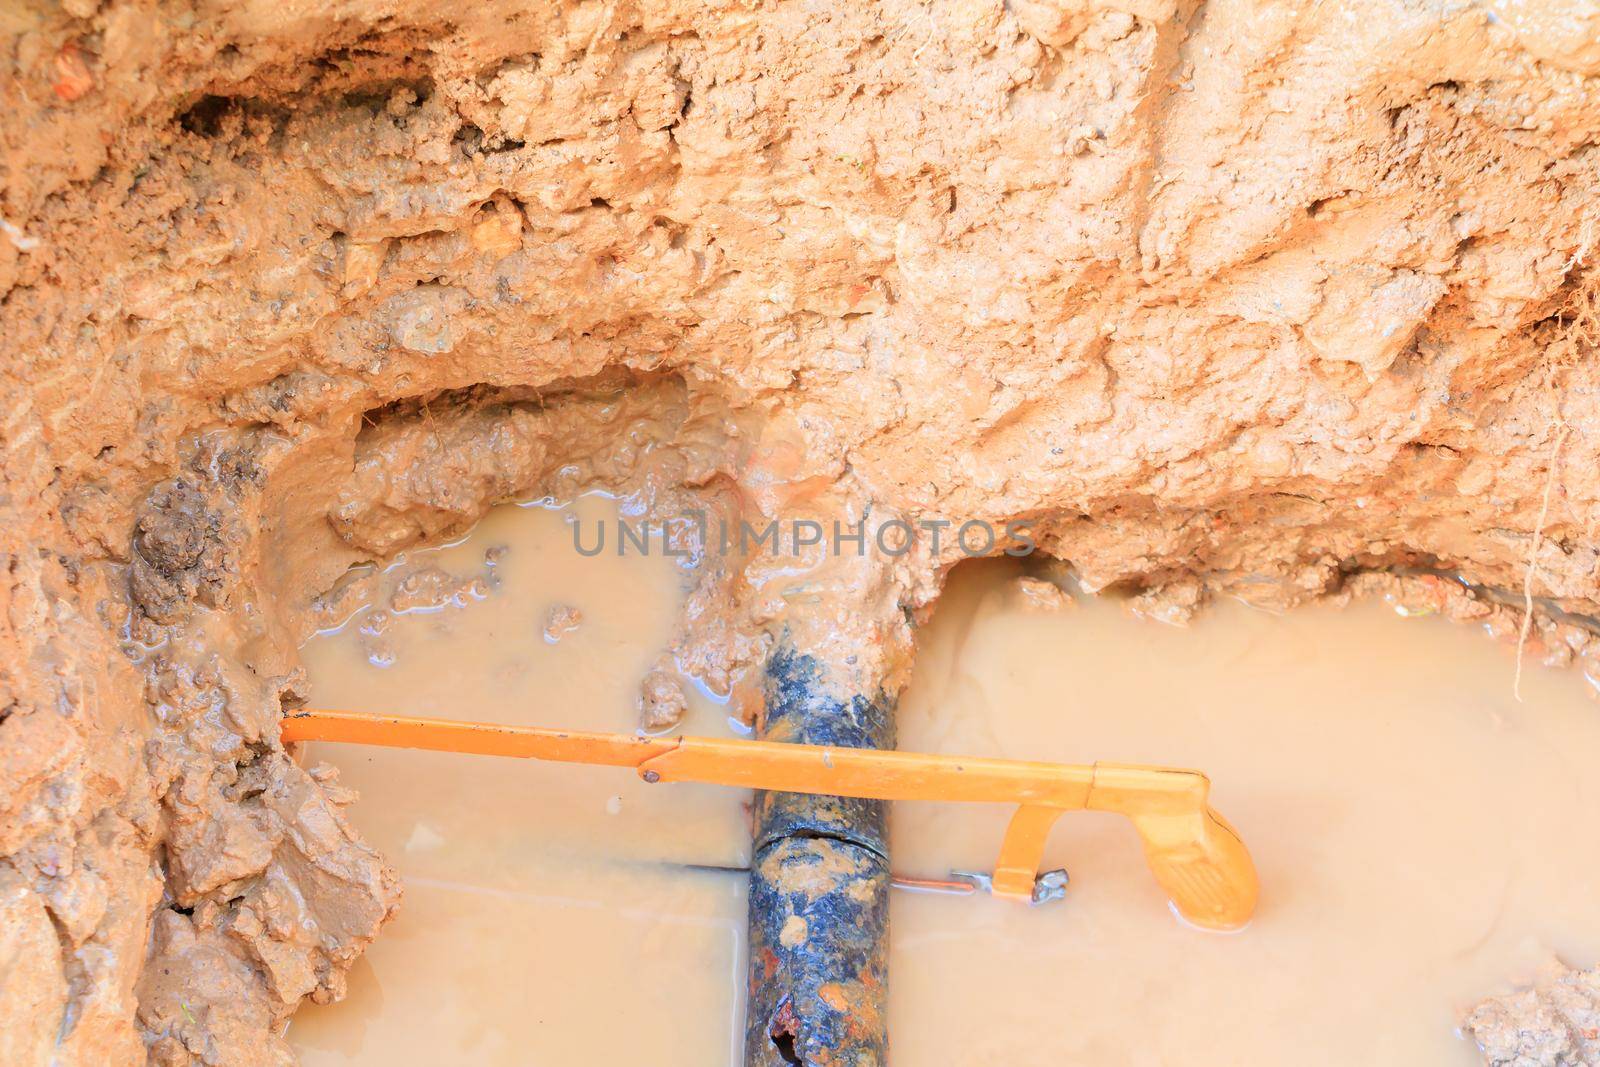 repair broken pipe in hole with plumbing water flow underground outdoor and sunlight with copy space add text by pramot